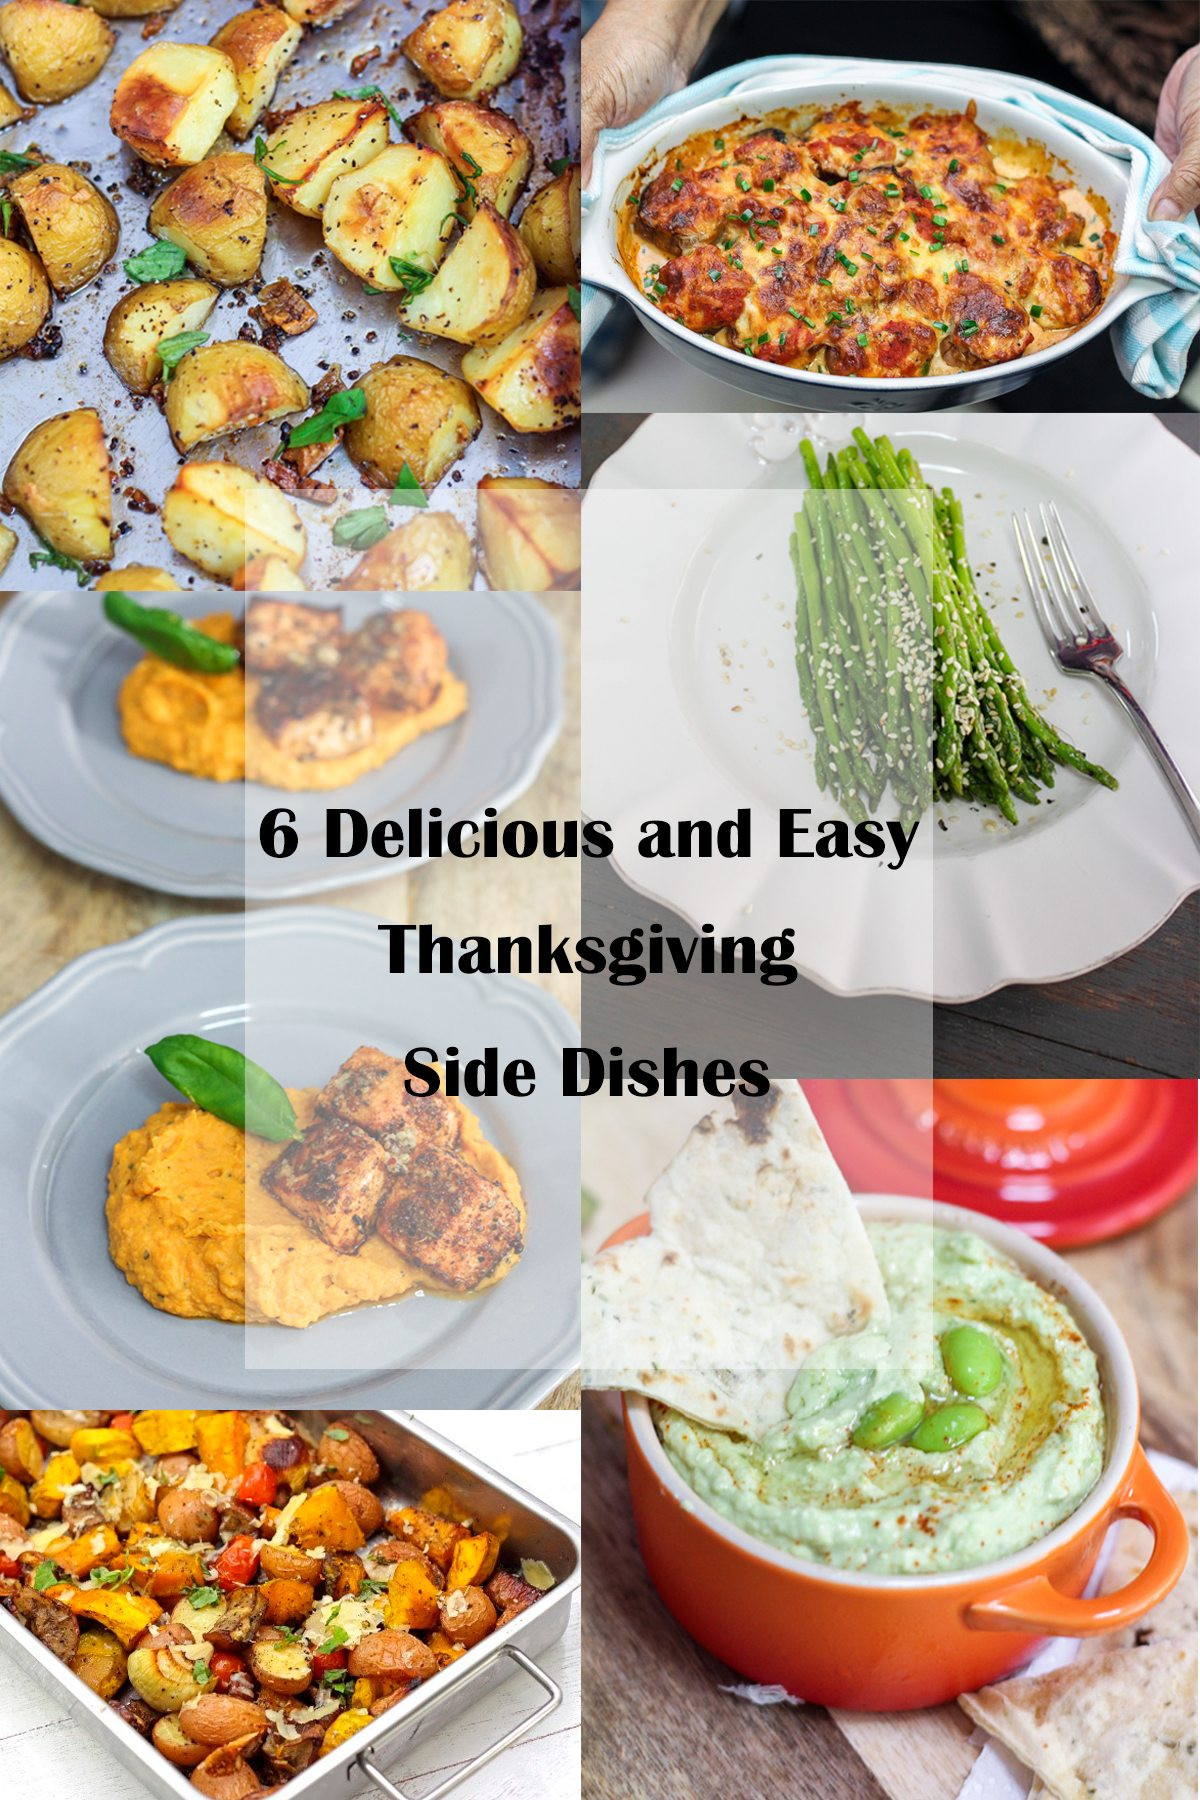 Thanksgiving Side Dishes Easy
 6 Delicious and Easy Thanksgiving Side Dishes